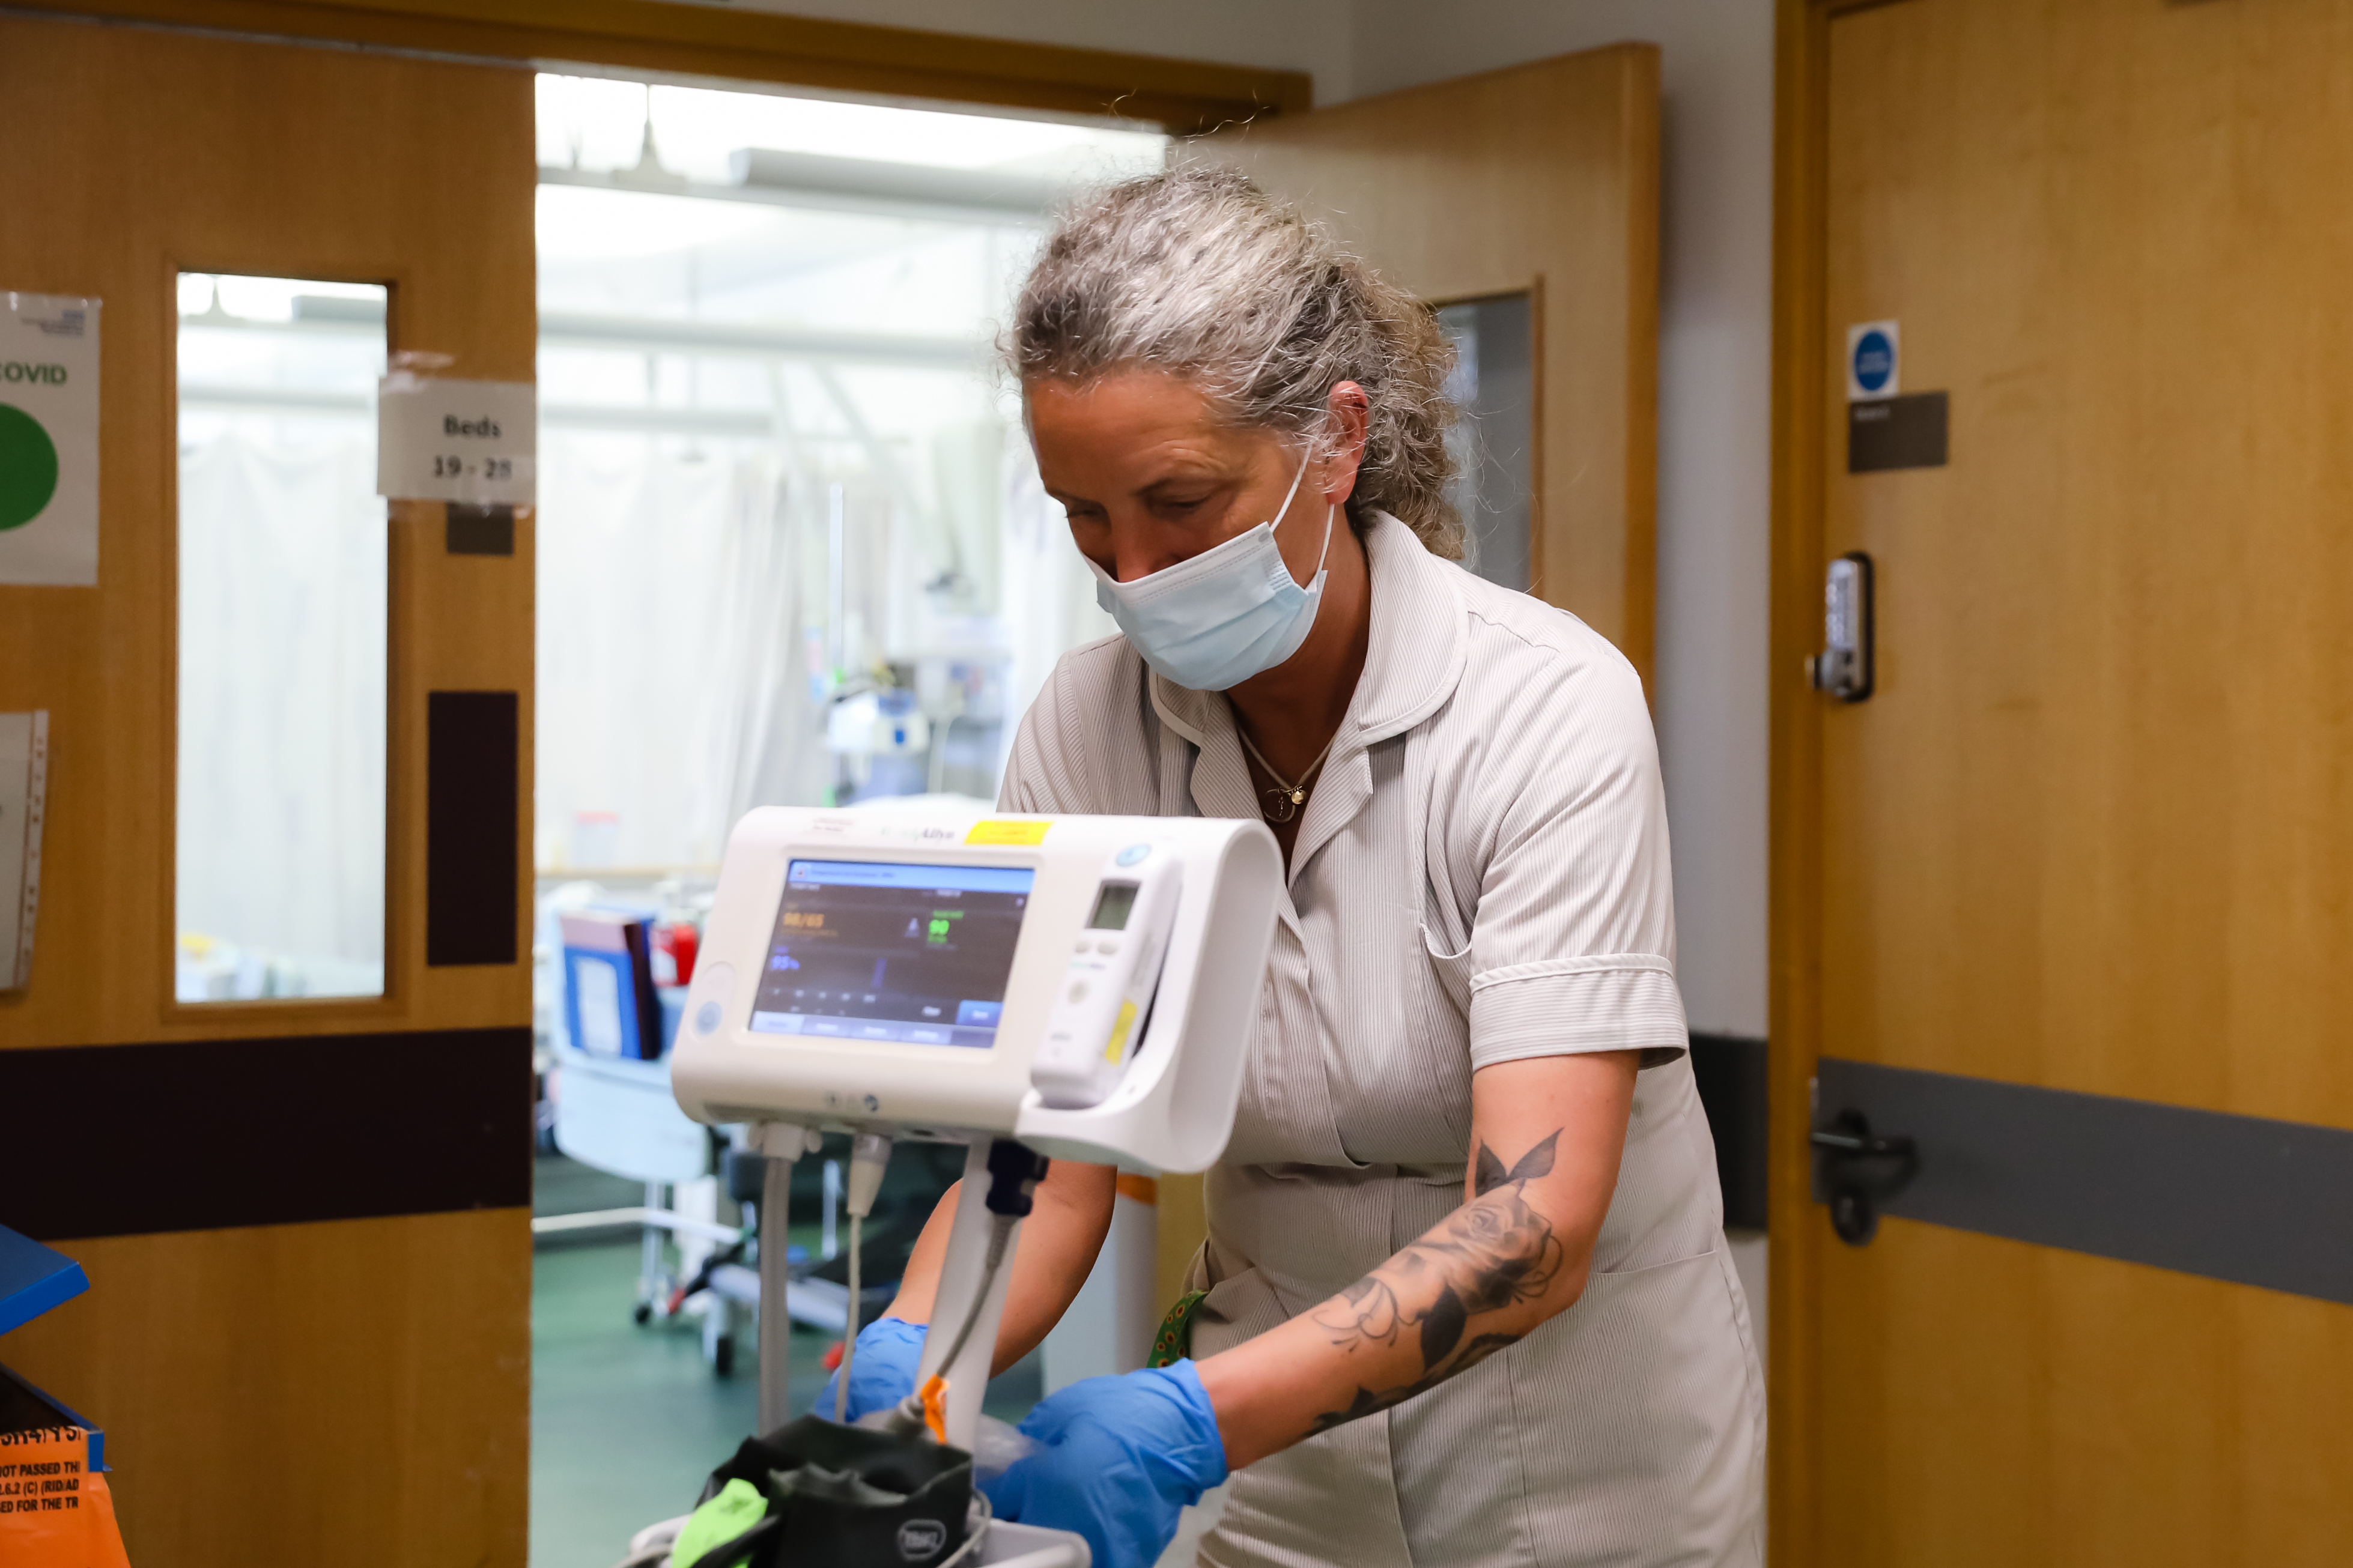 A Morecambe Bay NHS colleague in white uniform and blue gloves using a patient monitoring machine